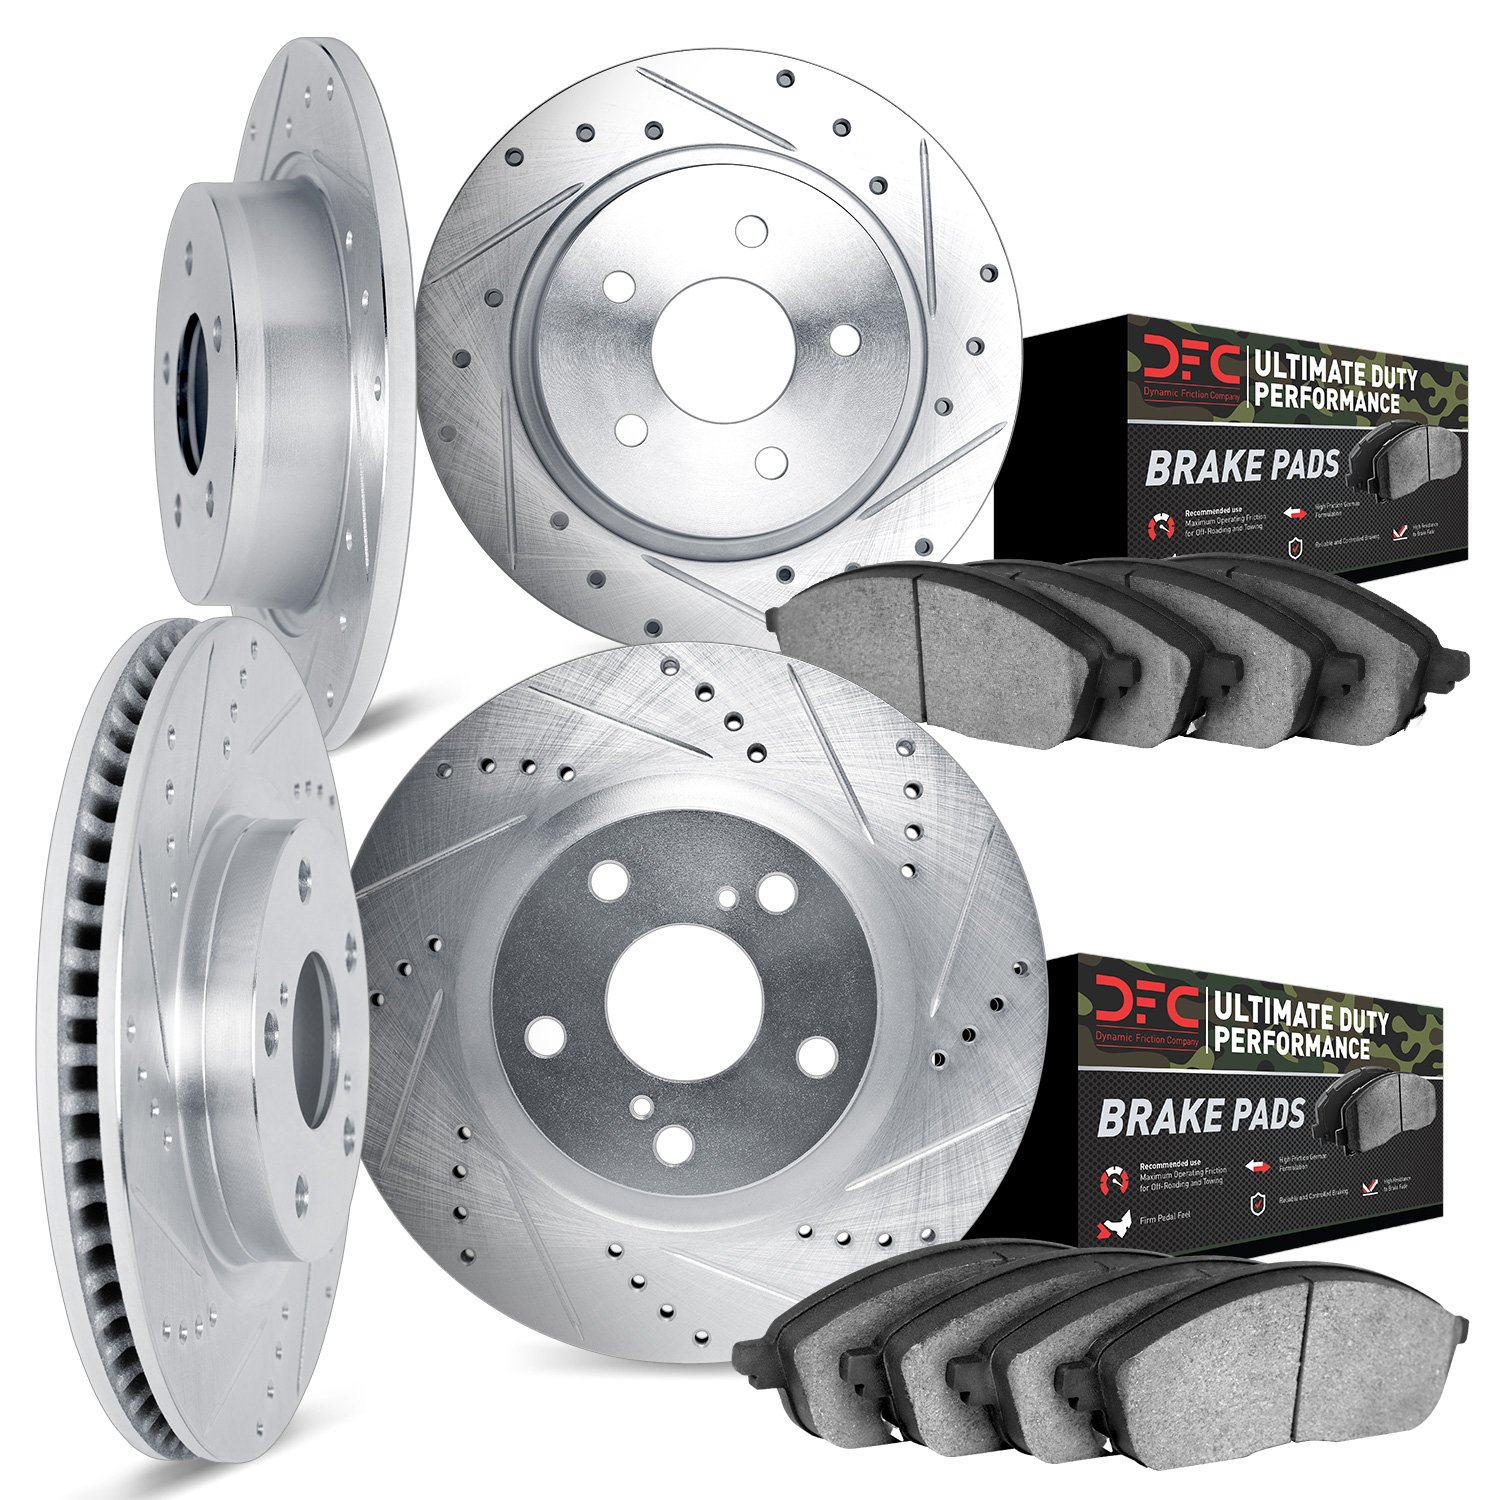 7404-42017 Drilled/Slotted Brake Rotors with Ultimate-Duty Brake Pads Kit [Silver], 2012-2018 Mopar, Position: Front and Rear